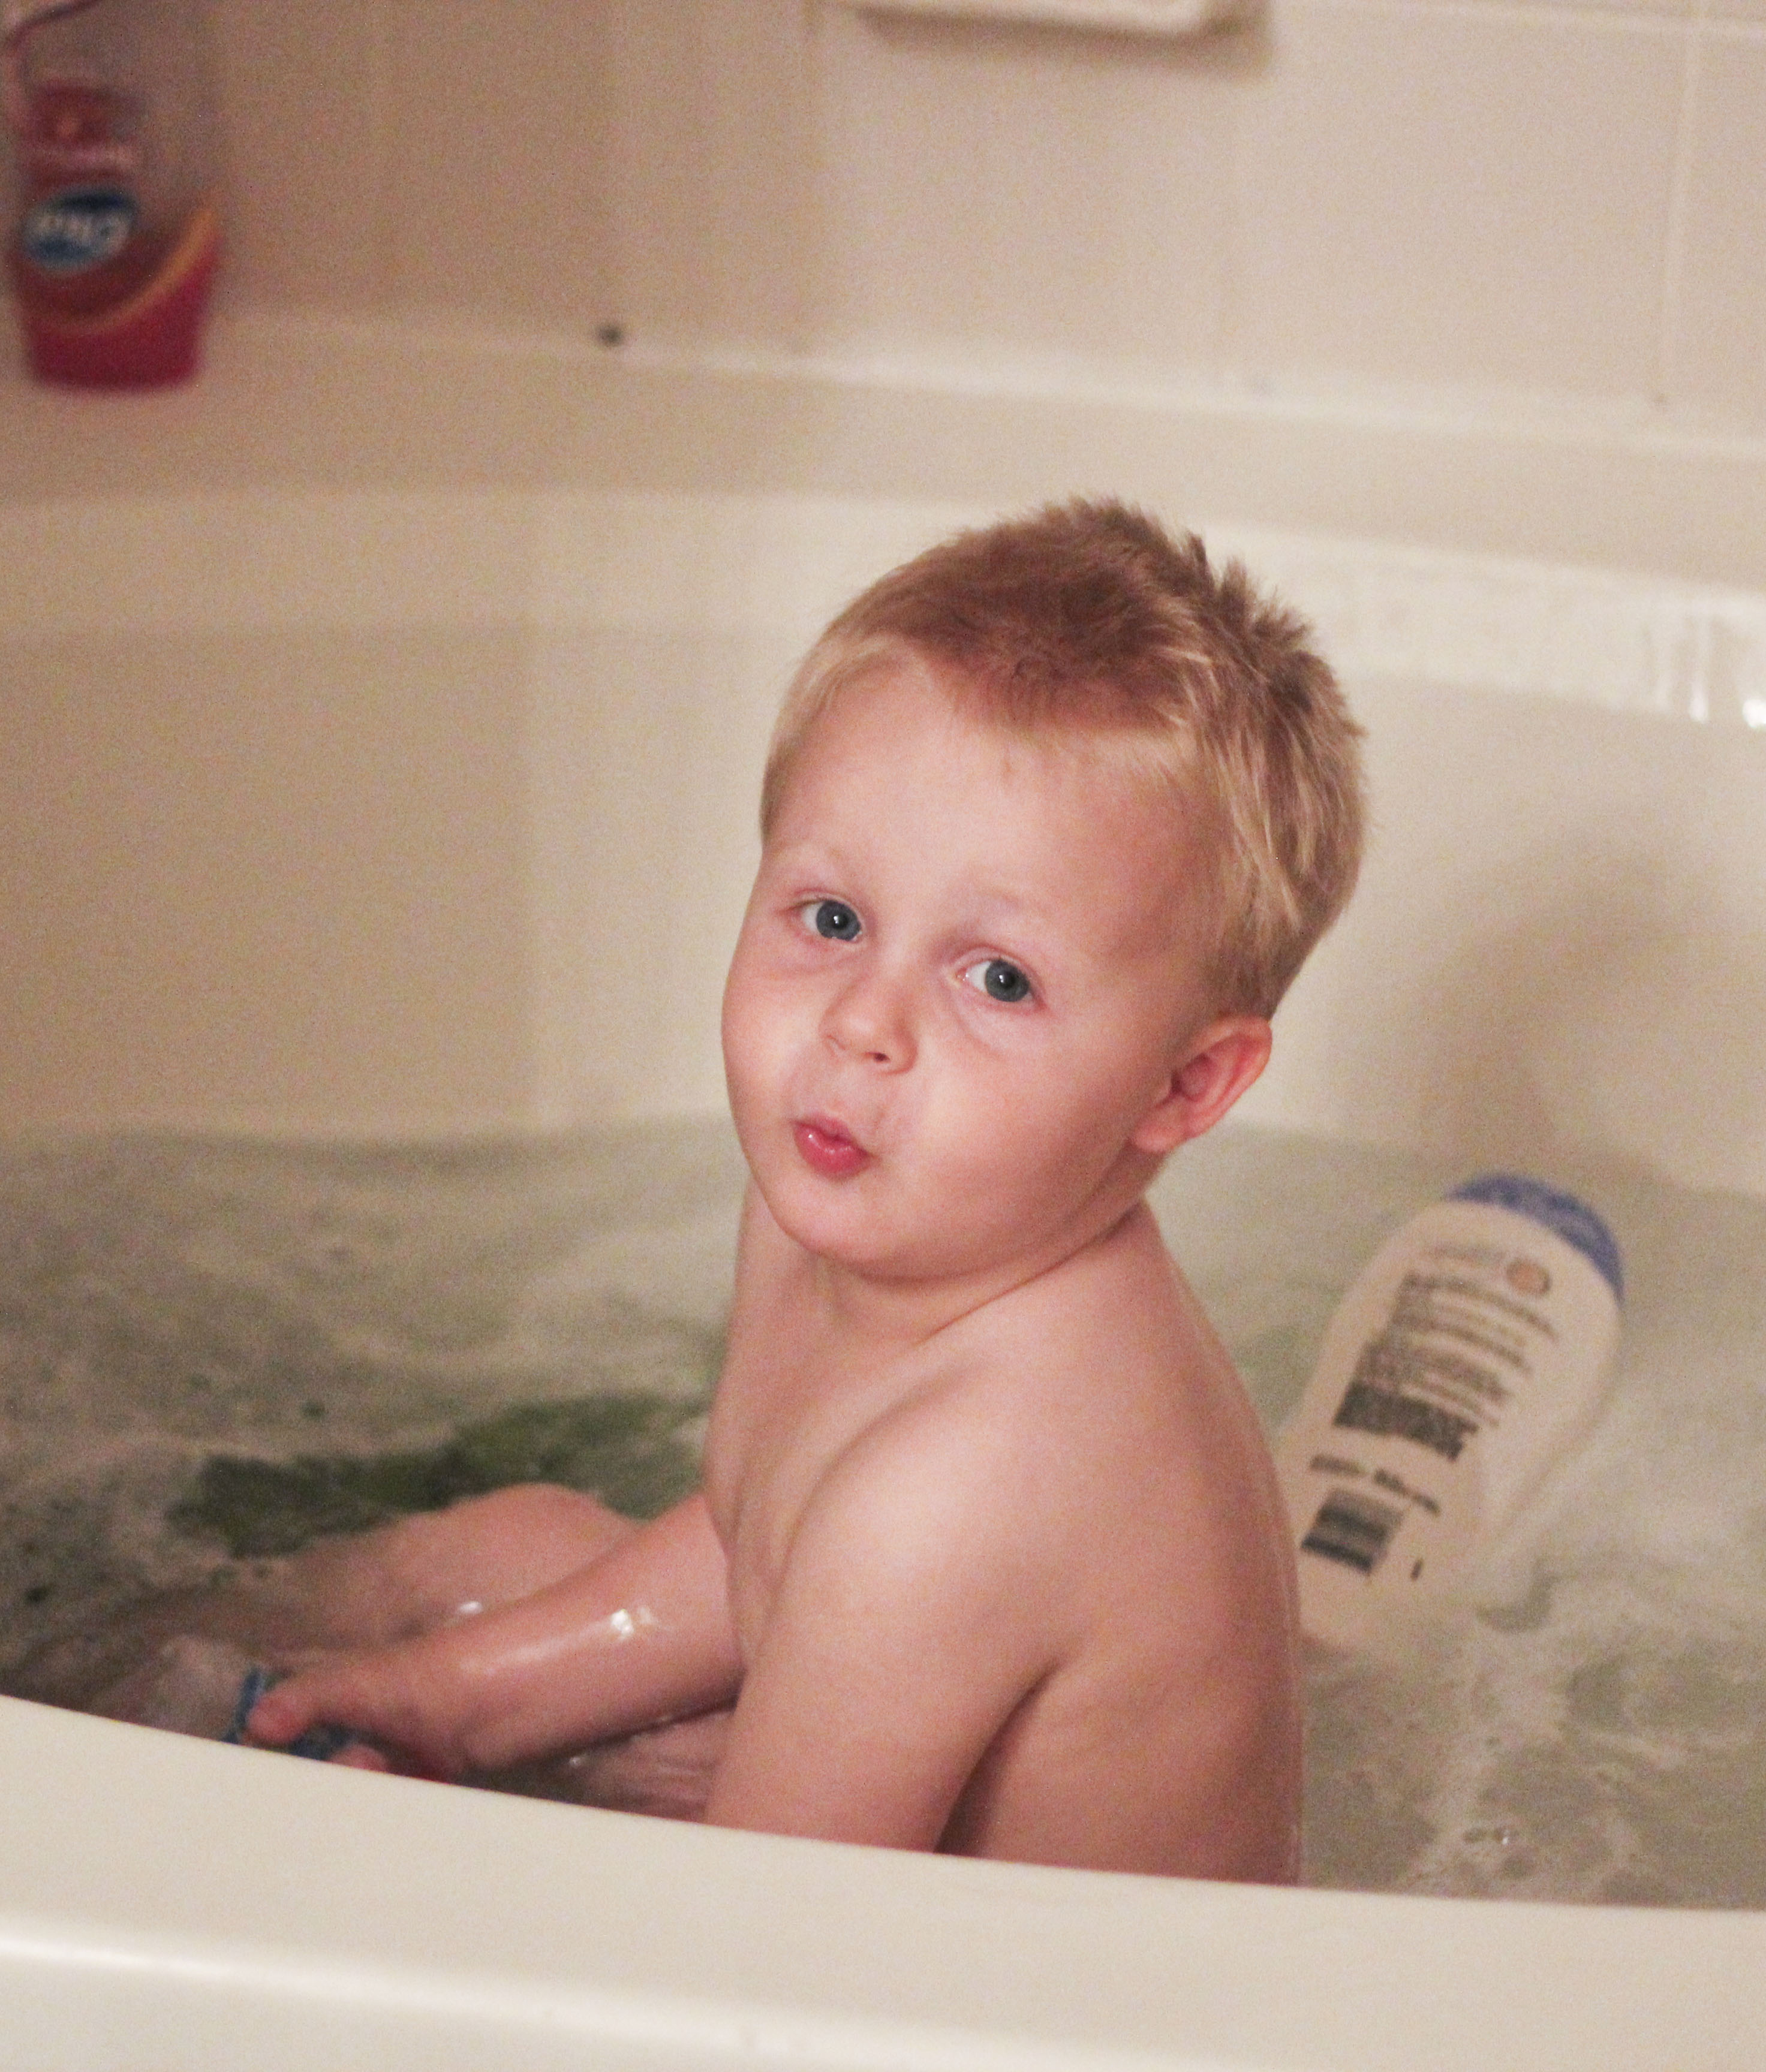 Why bath time is important for babies